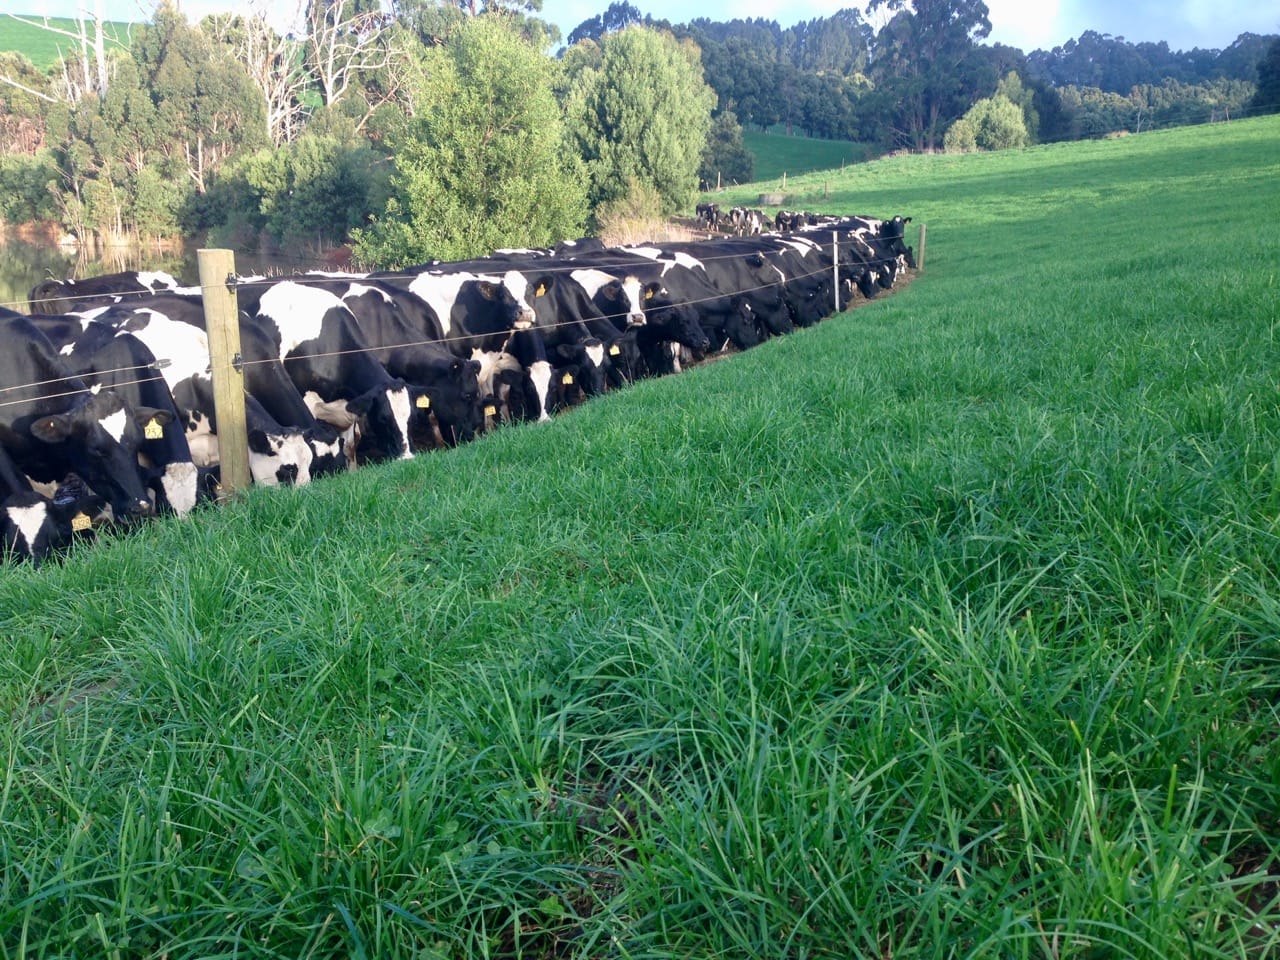 Dairy cows grazing fodder under a fence and into a bank on the Robin Hill Farm